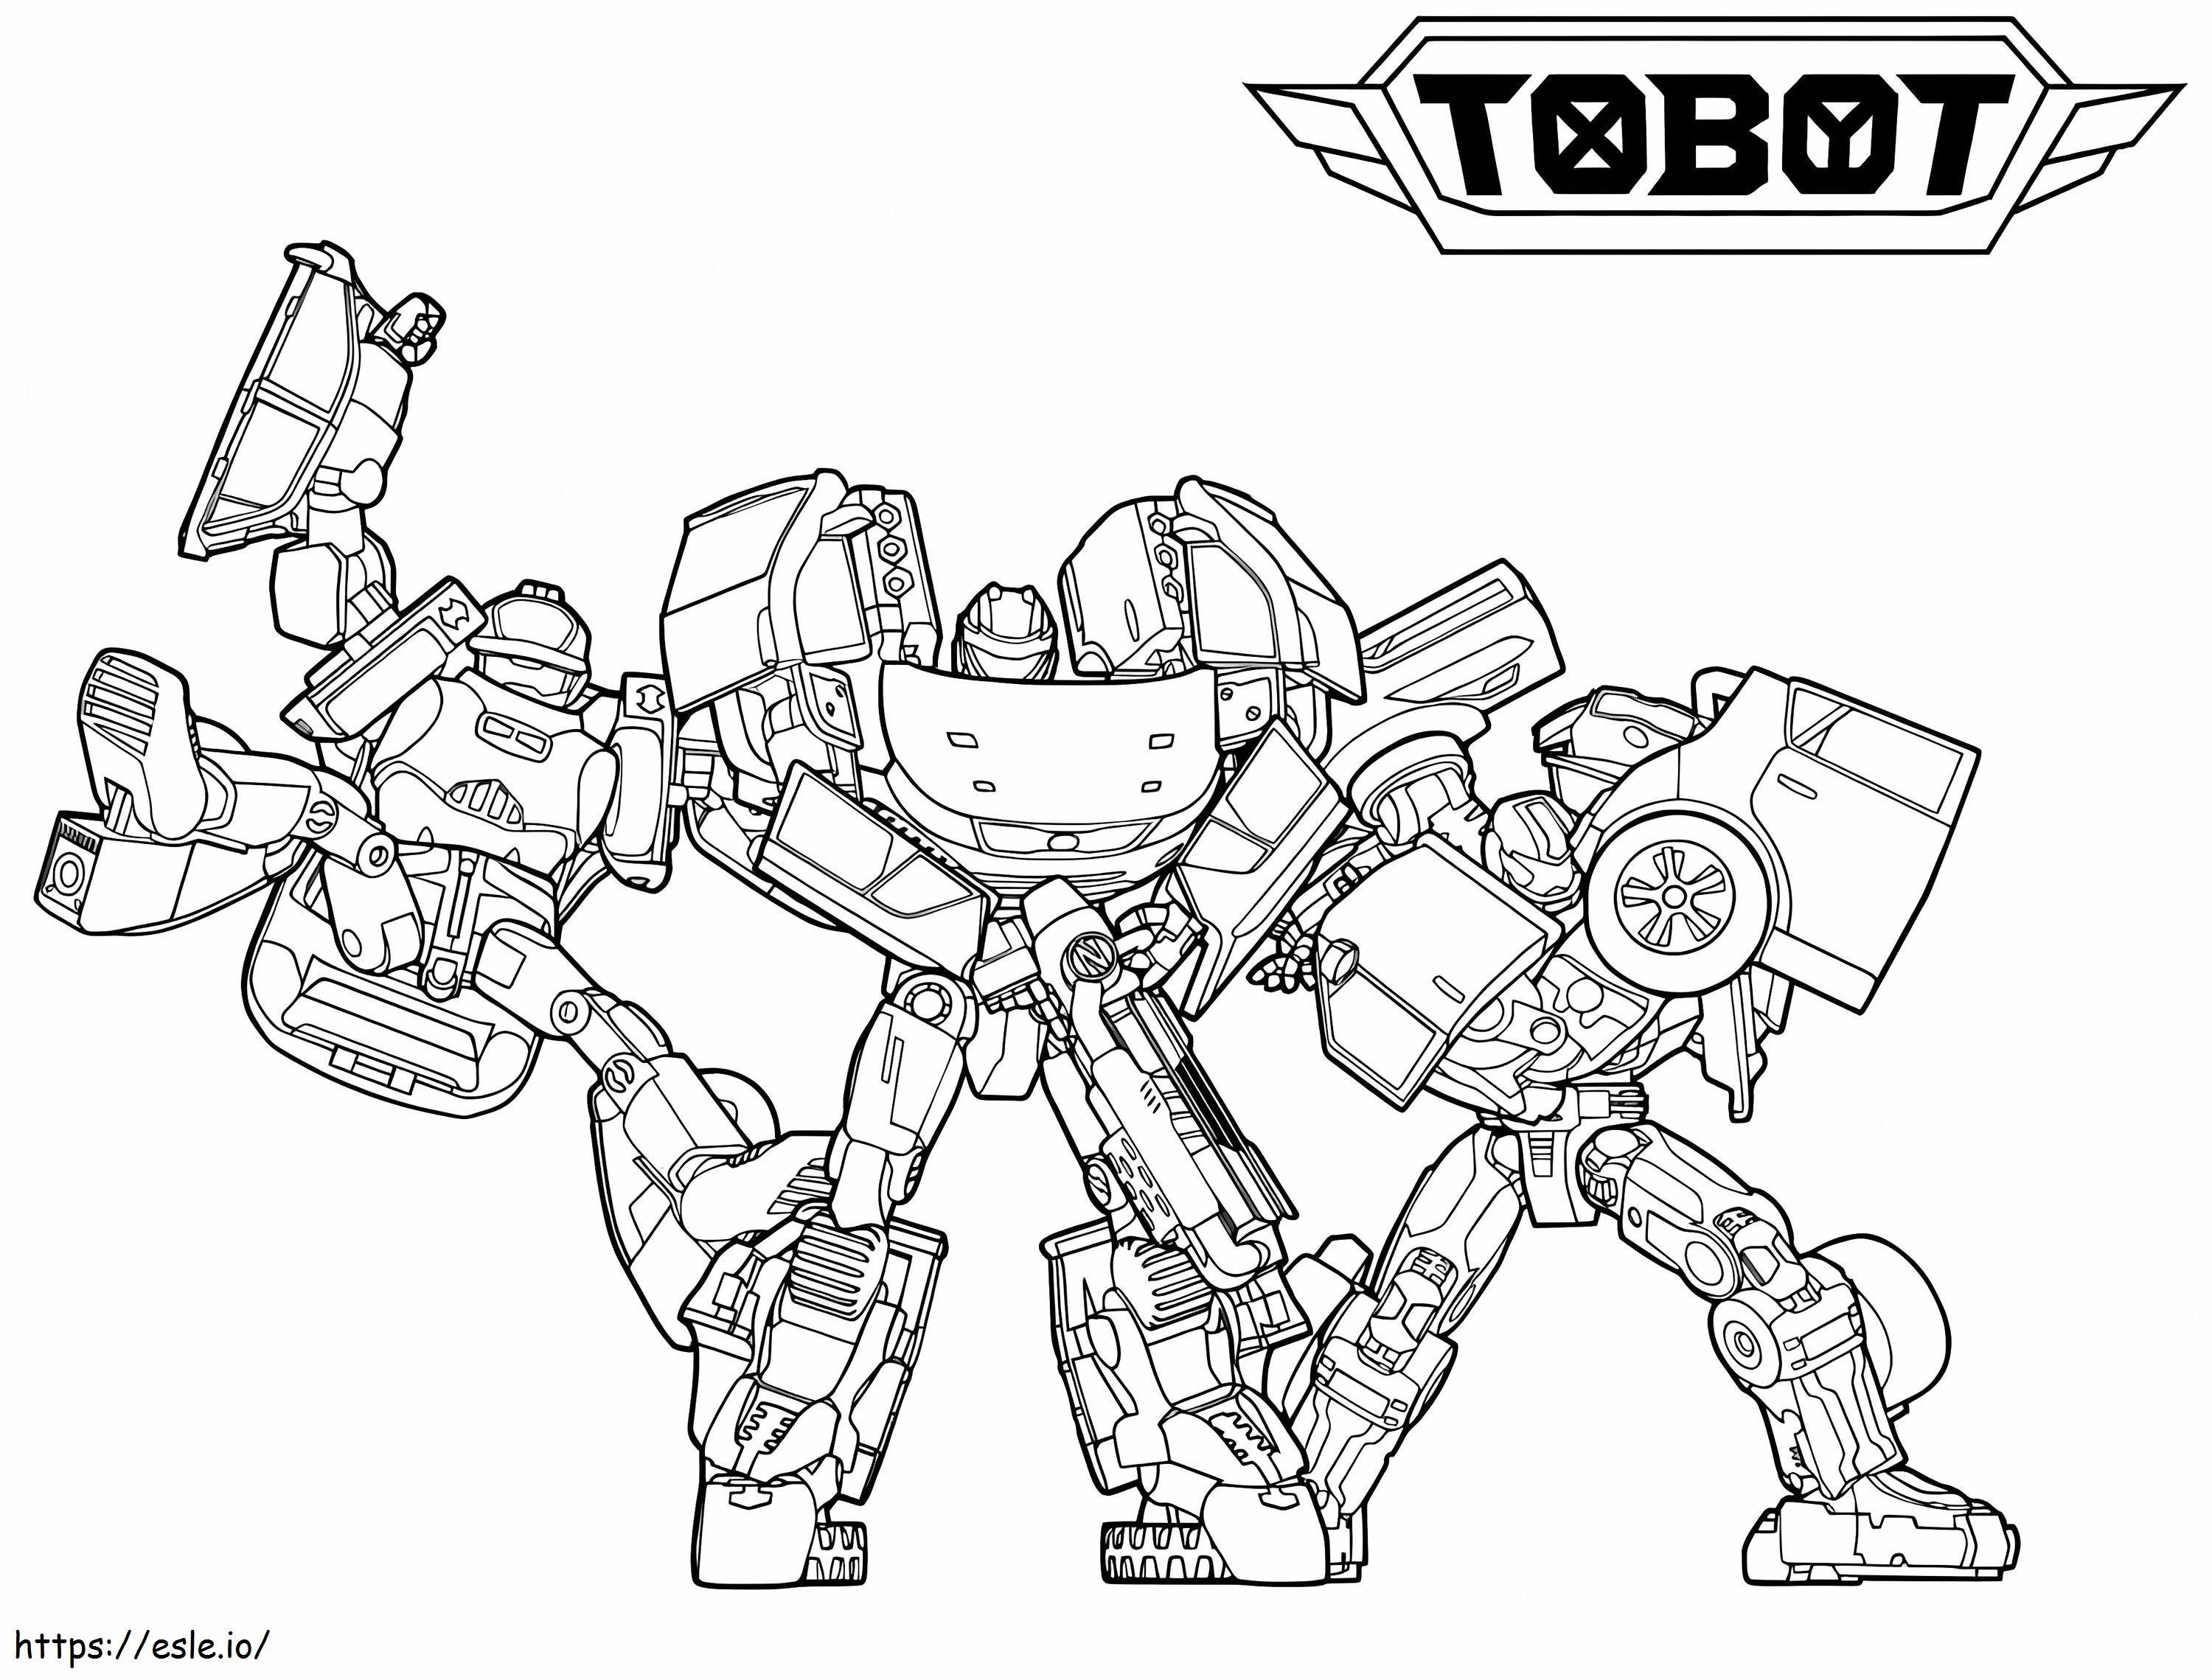 Amazing Tobot coloring page